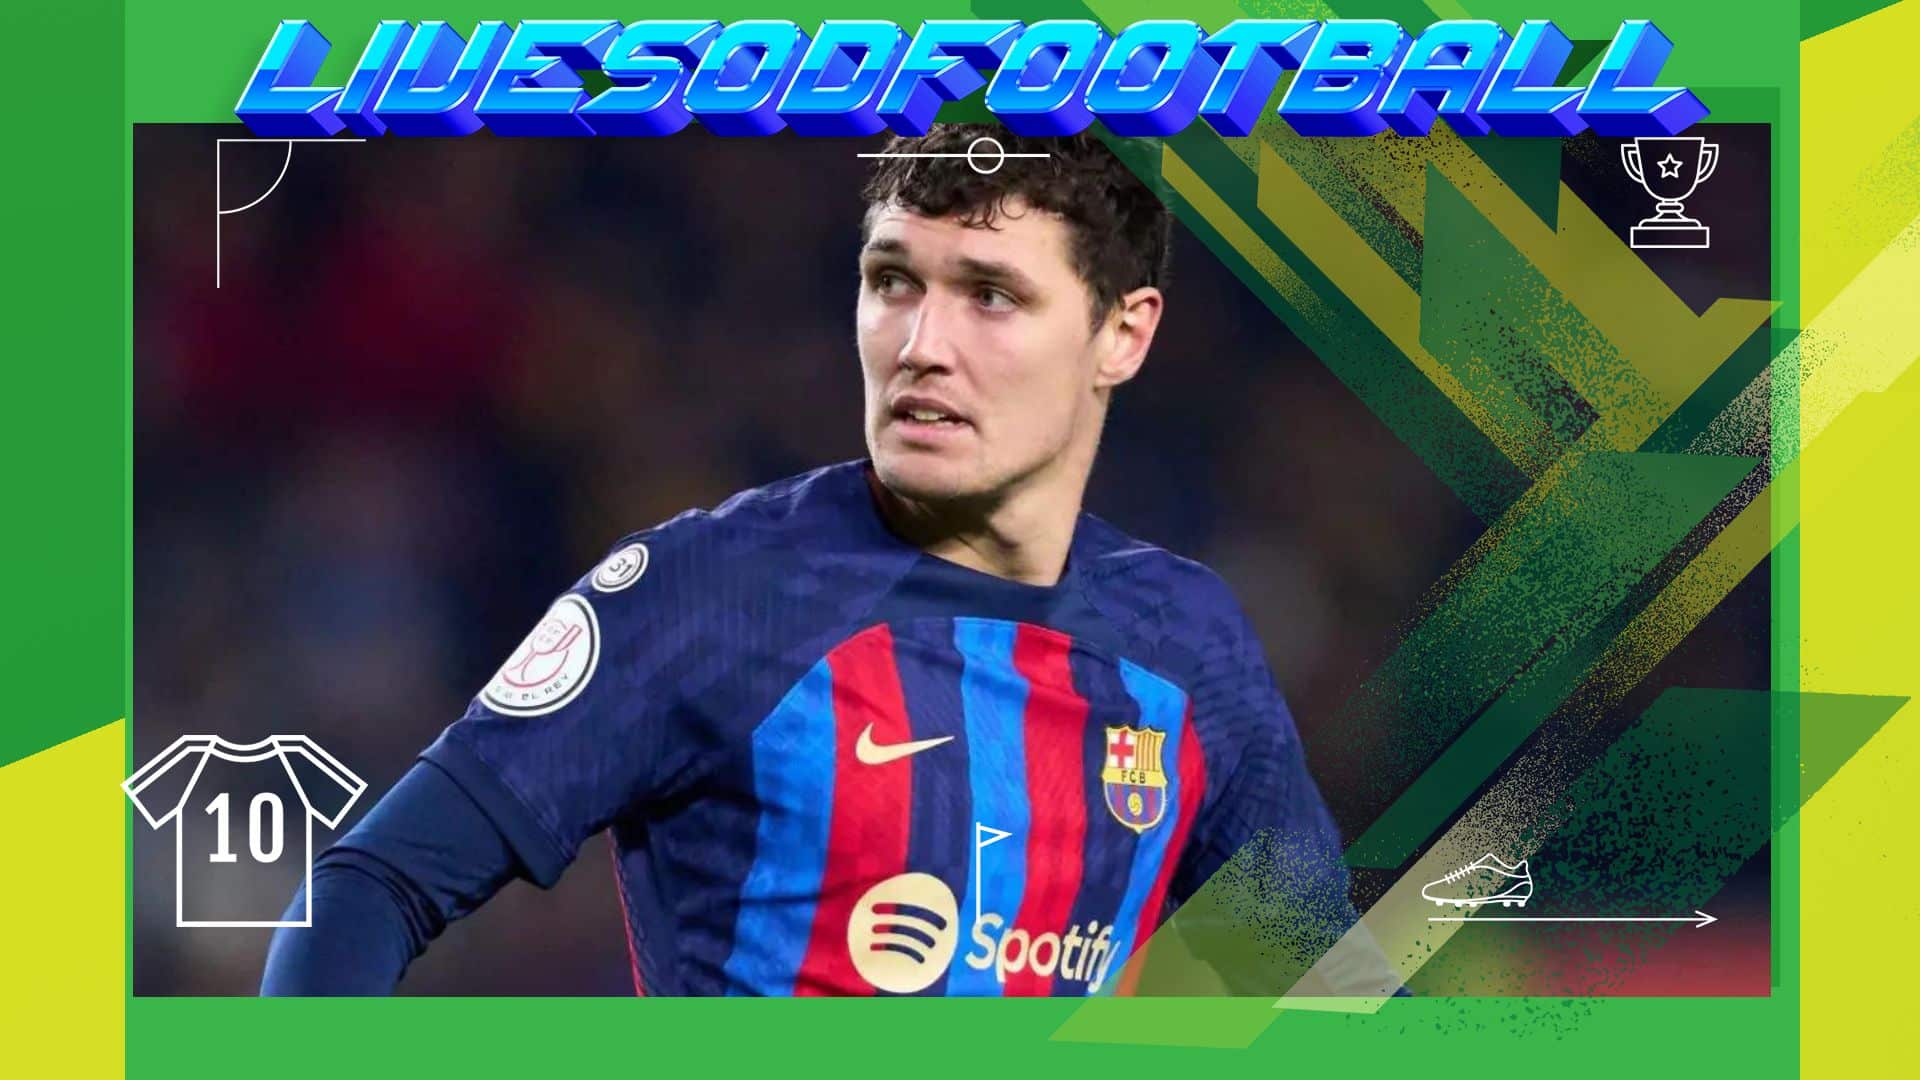 Barca hopes Andreas Christensen will be fit in time to face Bilbao